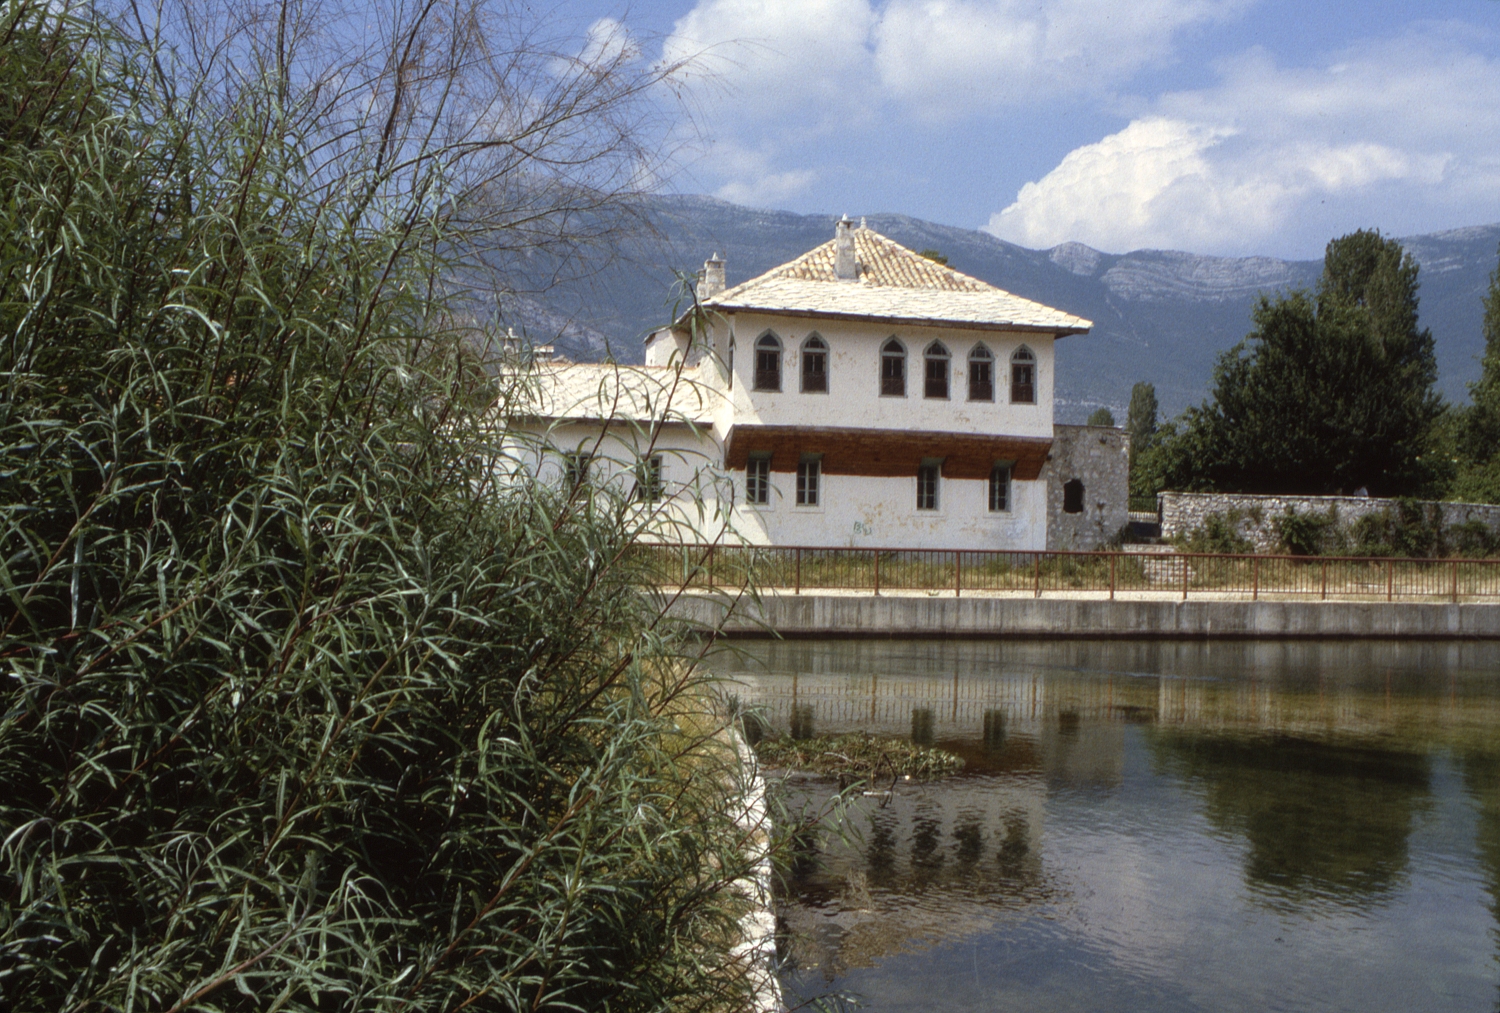 Exterior view from the south across the Trebišnjica River